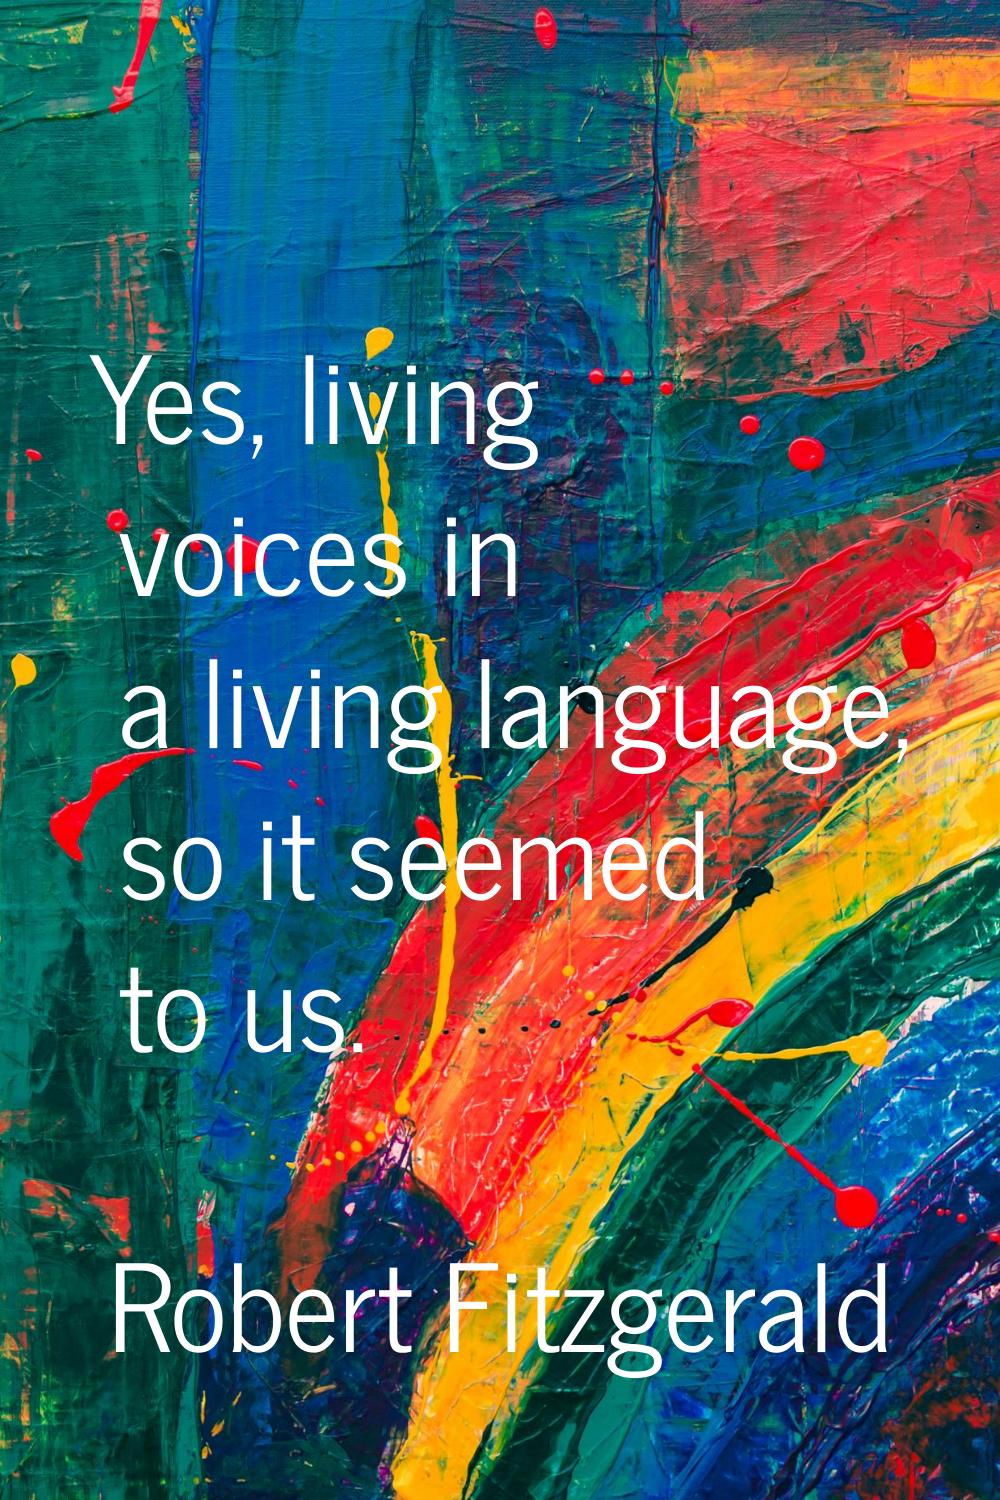 Yes, living voices in a living language, so it seemed to us.